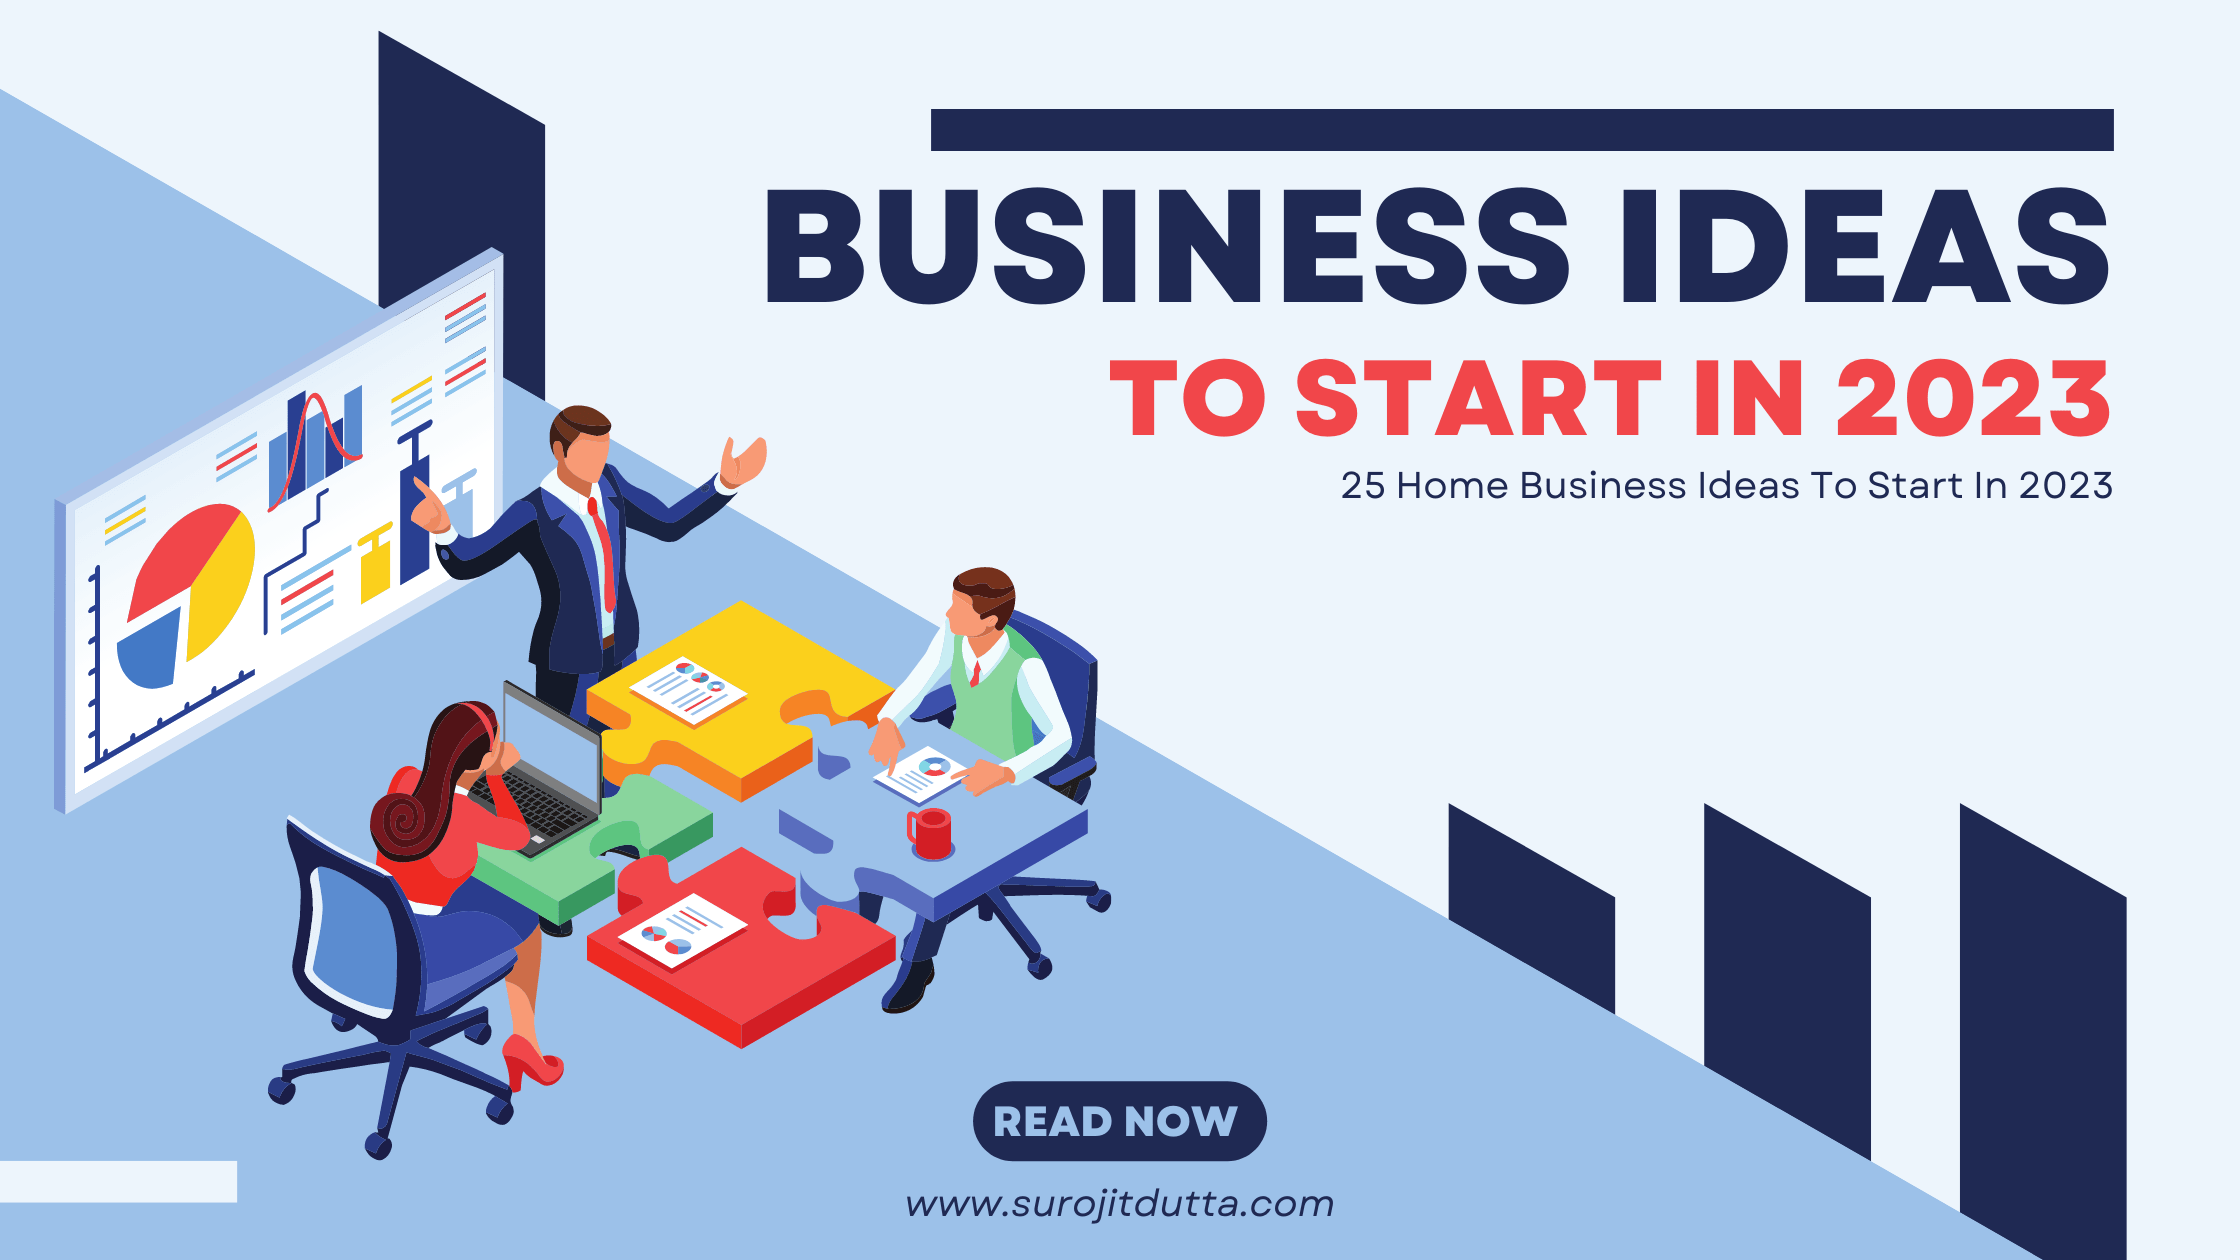 25 Home Business Ideas To Start In 2023